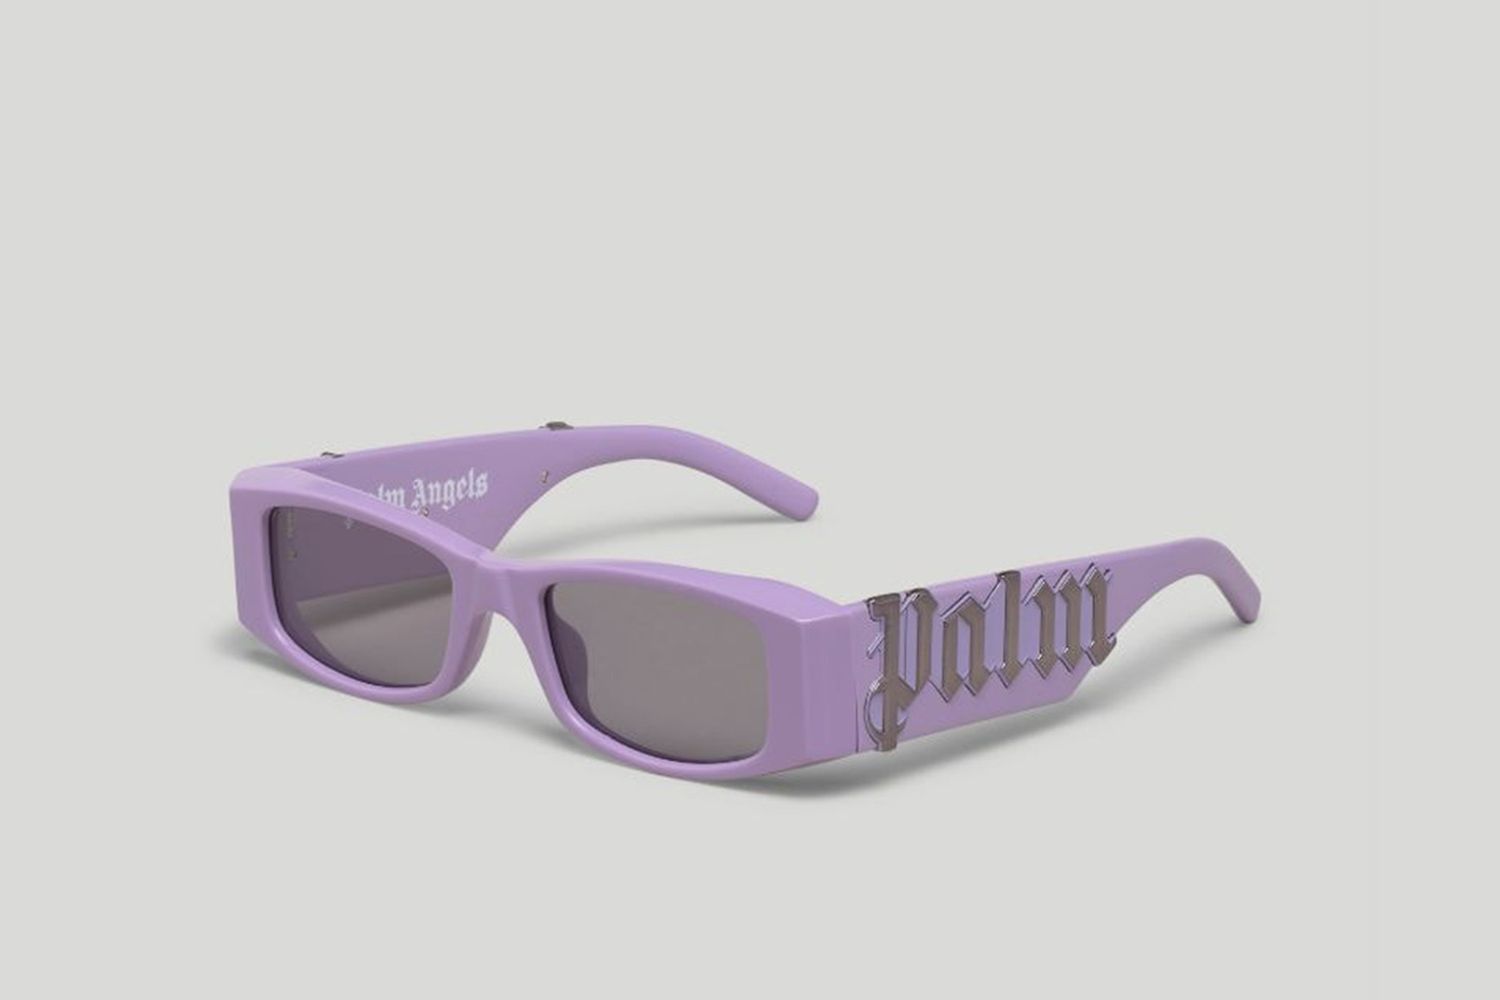 Shop Palm Angels Sunglasses for Summer 2021 Here